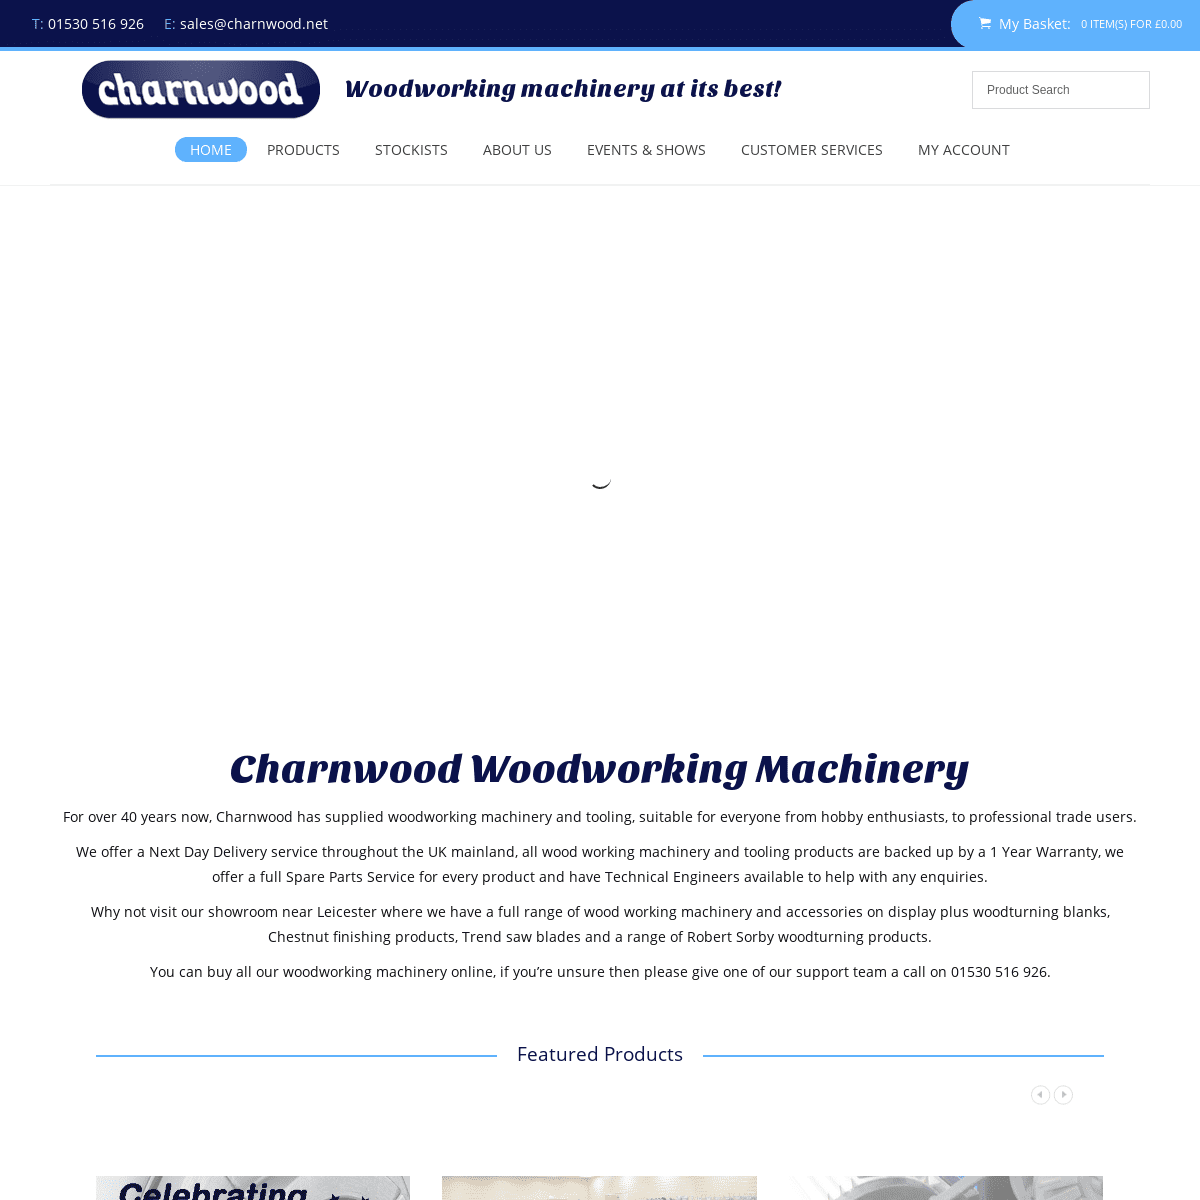 Charnwood | Woodworking Machinery and Tooling for Trade and Enthusiast